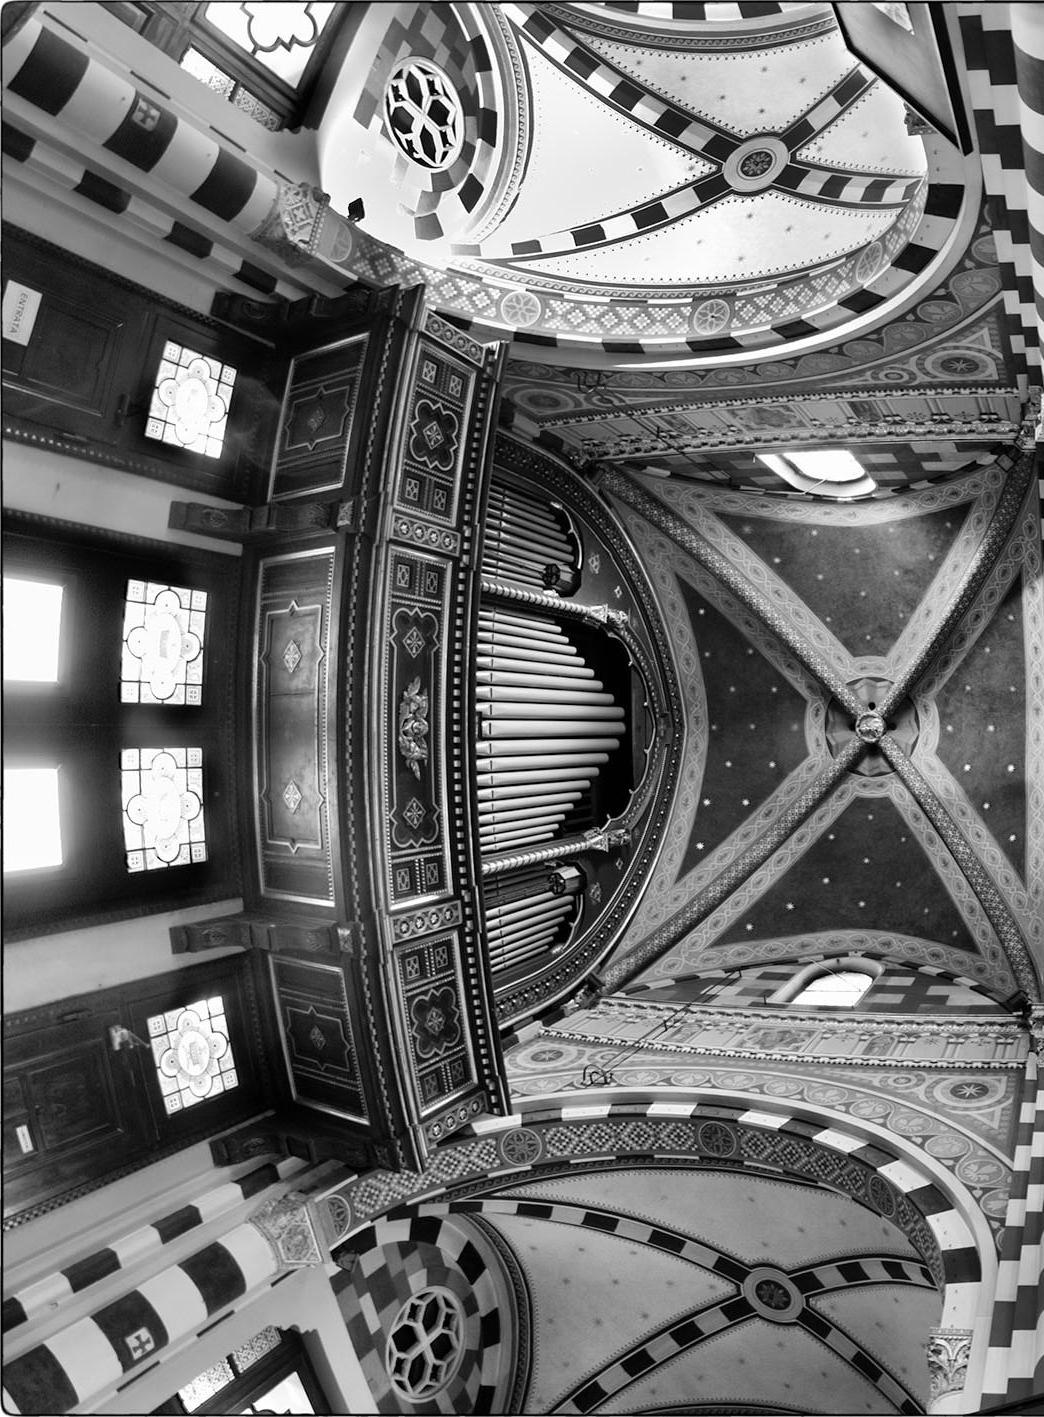 Photo taken inside the Santa Eufemia church - Milan (Italy).

Marcelo Soulé (Buenos Aires, 1958) trained at the Artistic Lyceum and the Brera Academy in Milan. He lives and works between Milan and Barcelona. He began his career in photography at an